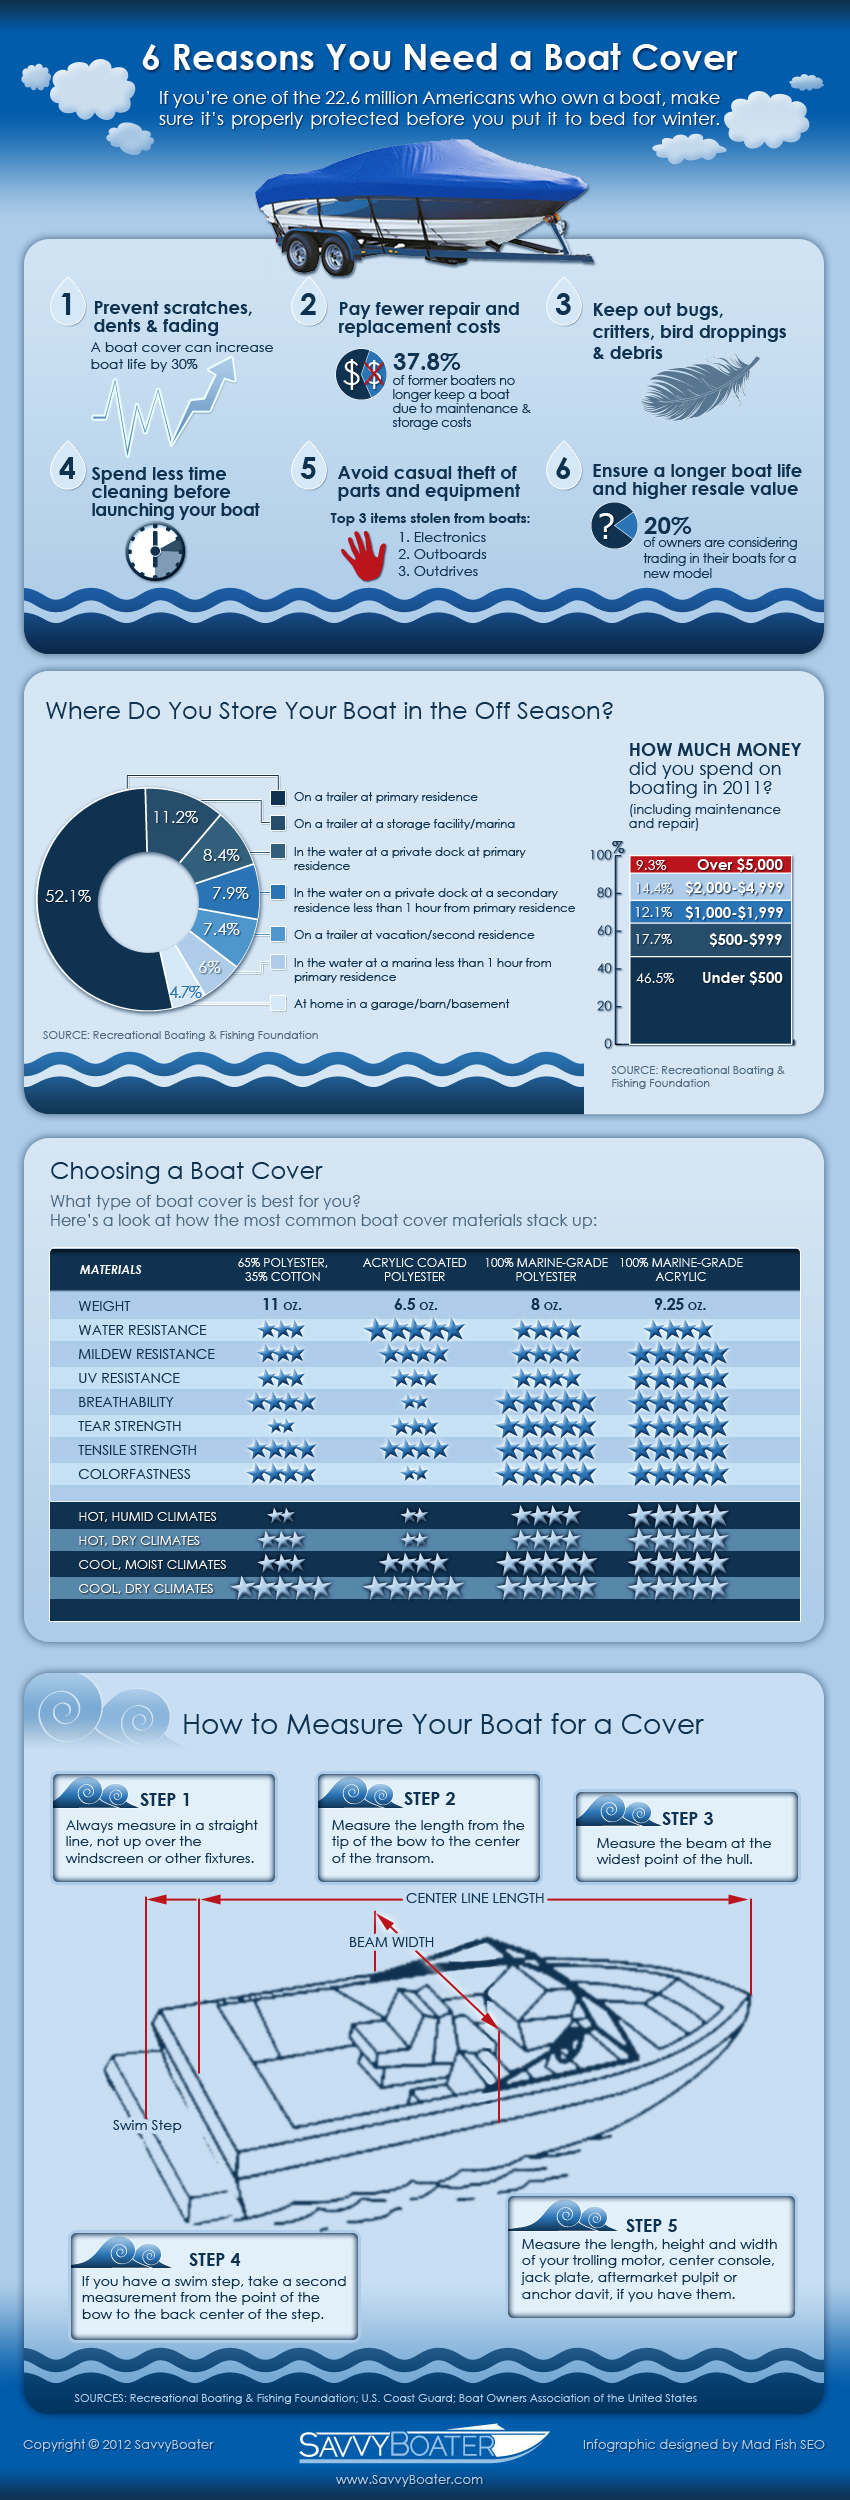 6 Reasons You Should Use a Boat Cover